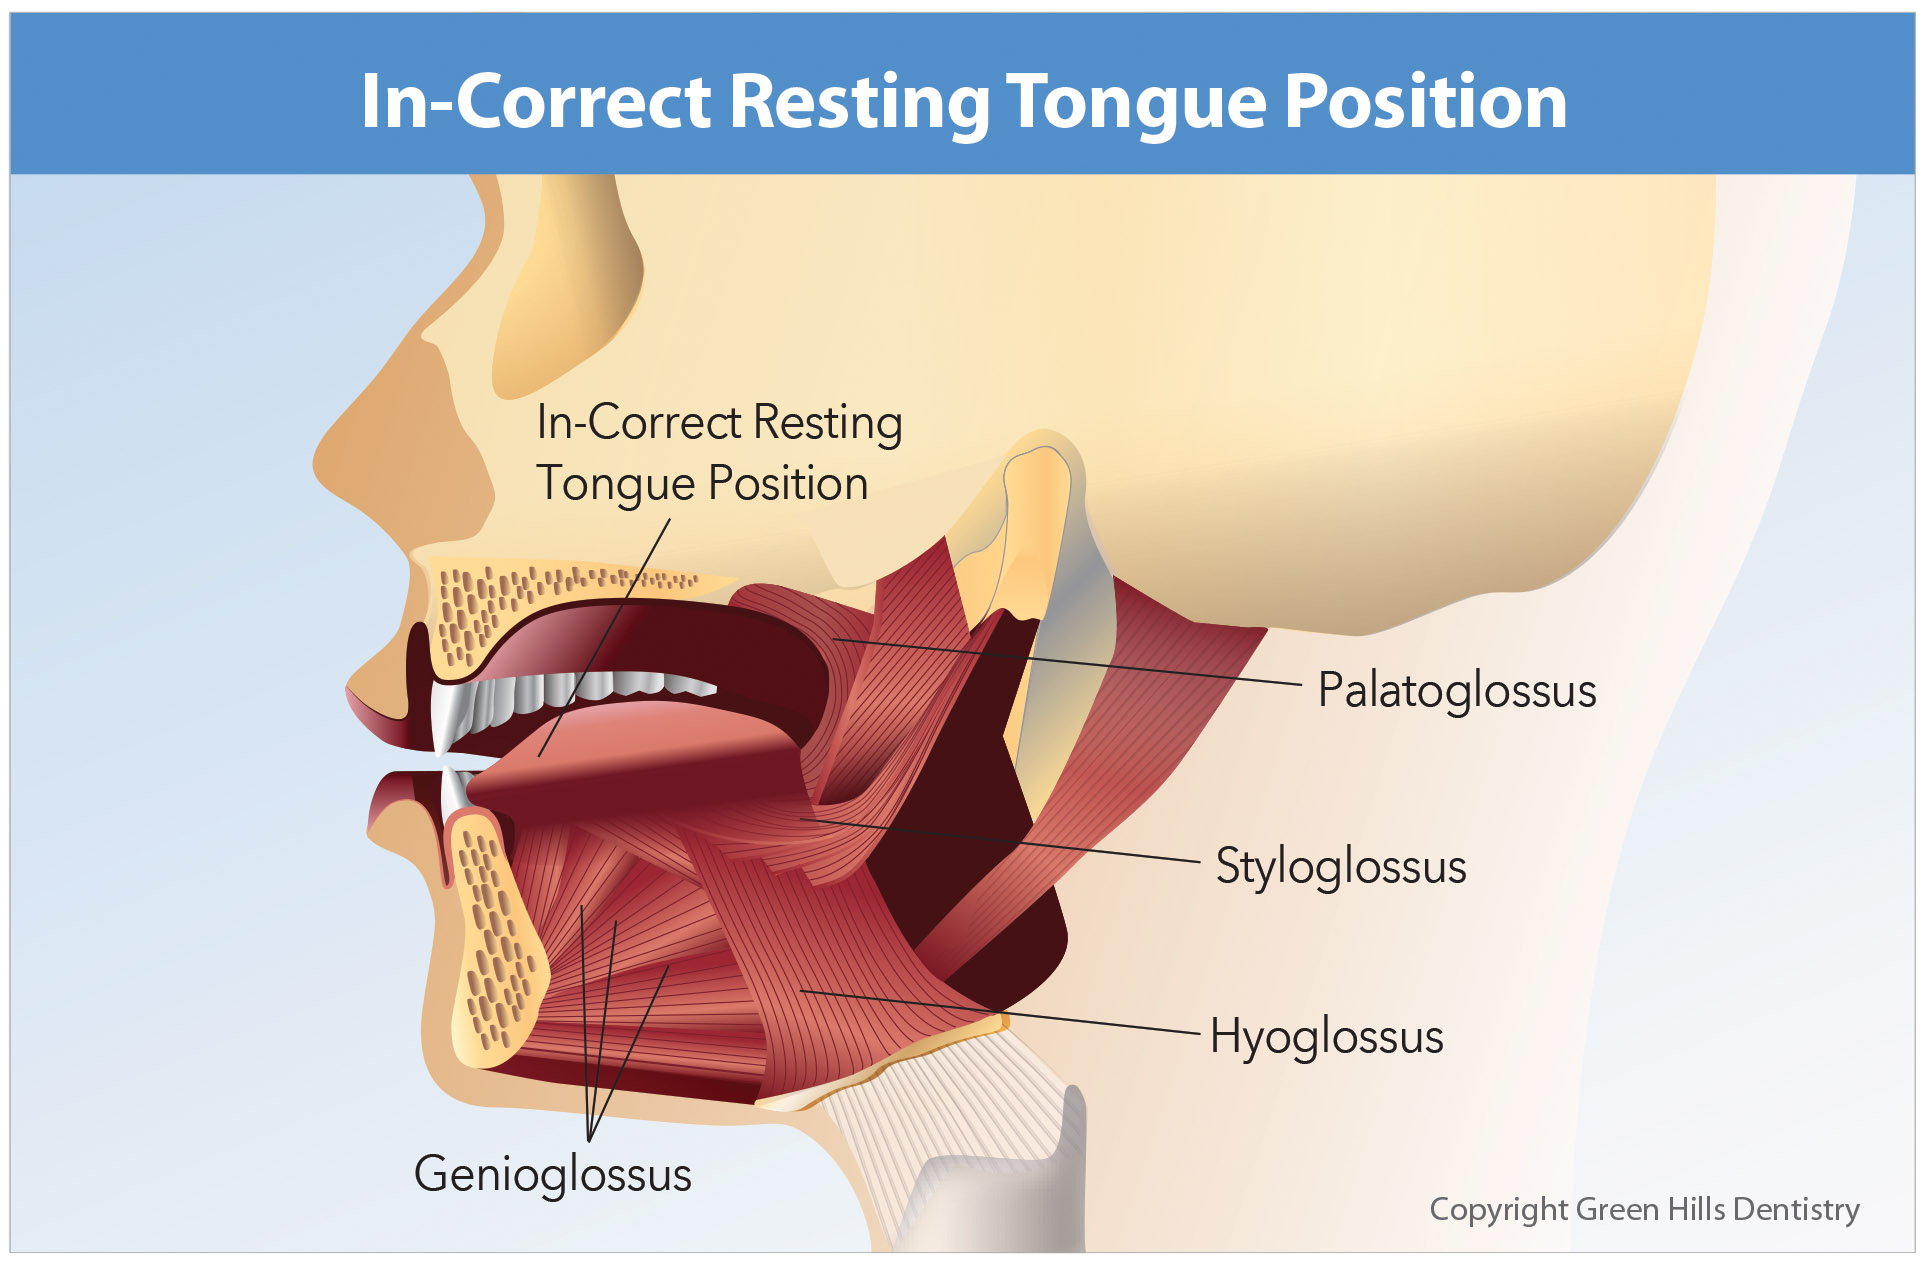 Incorrect resting tongue position